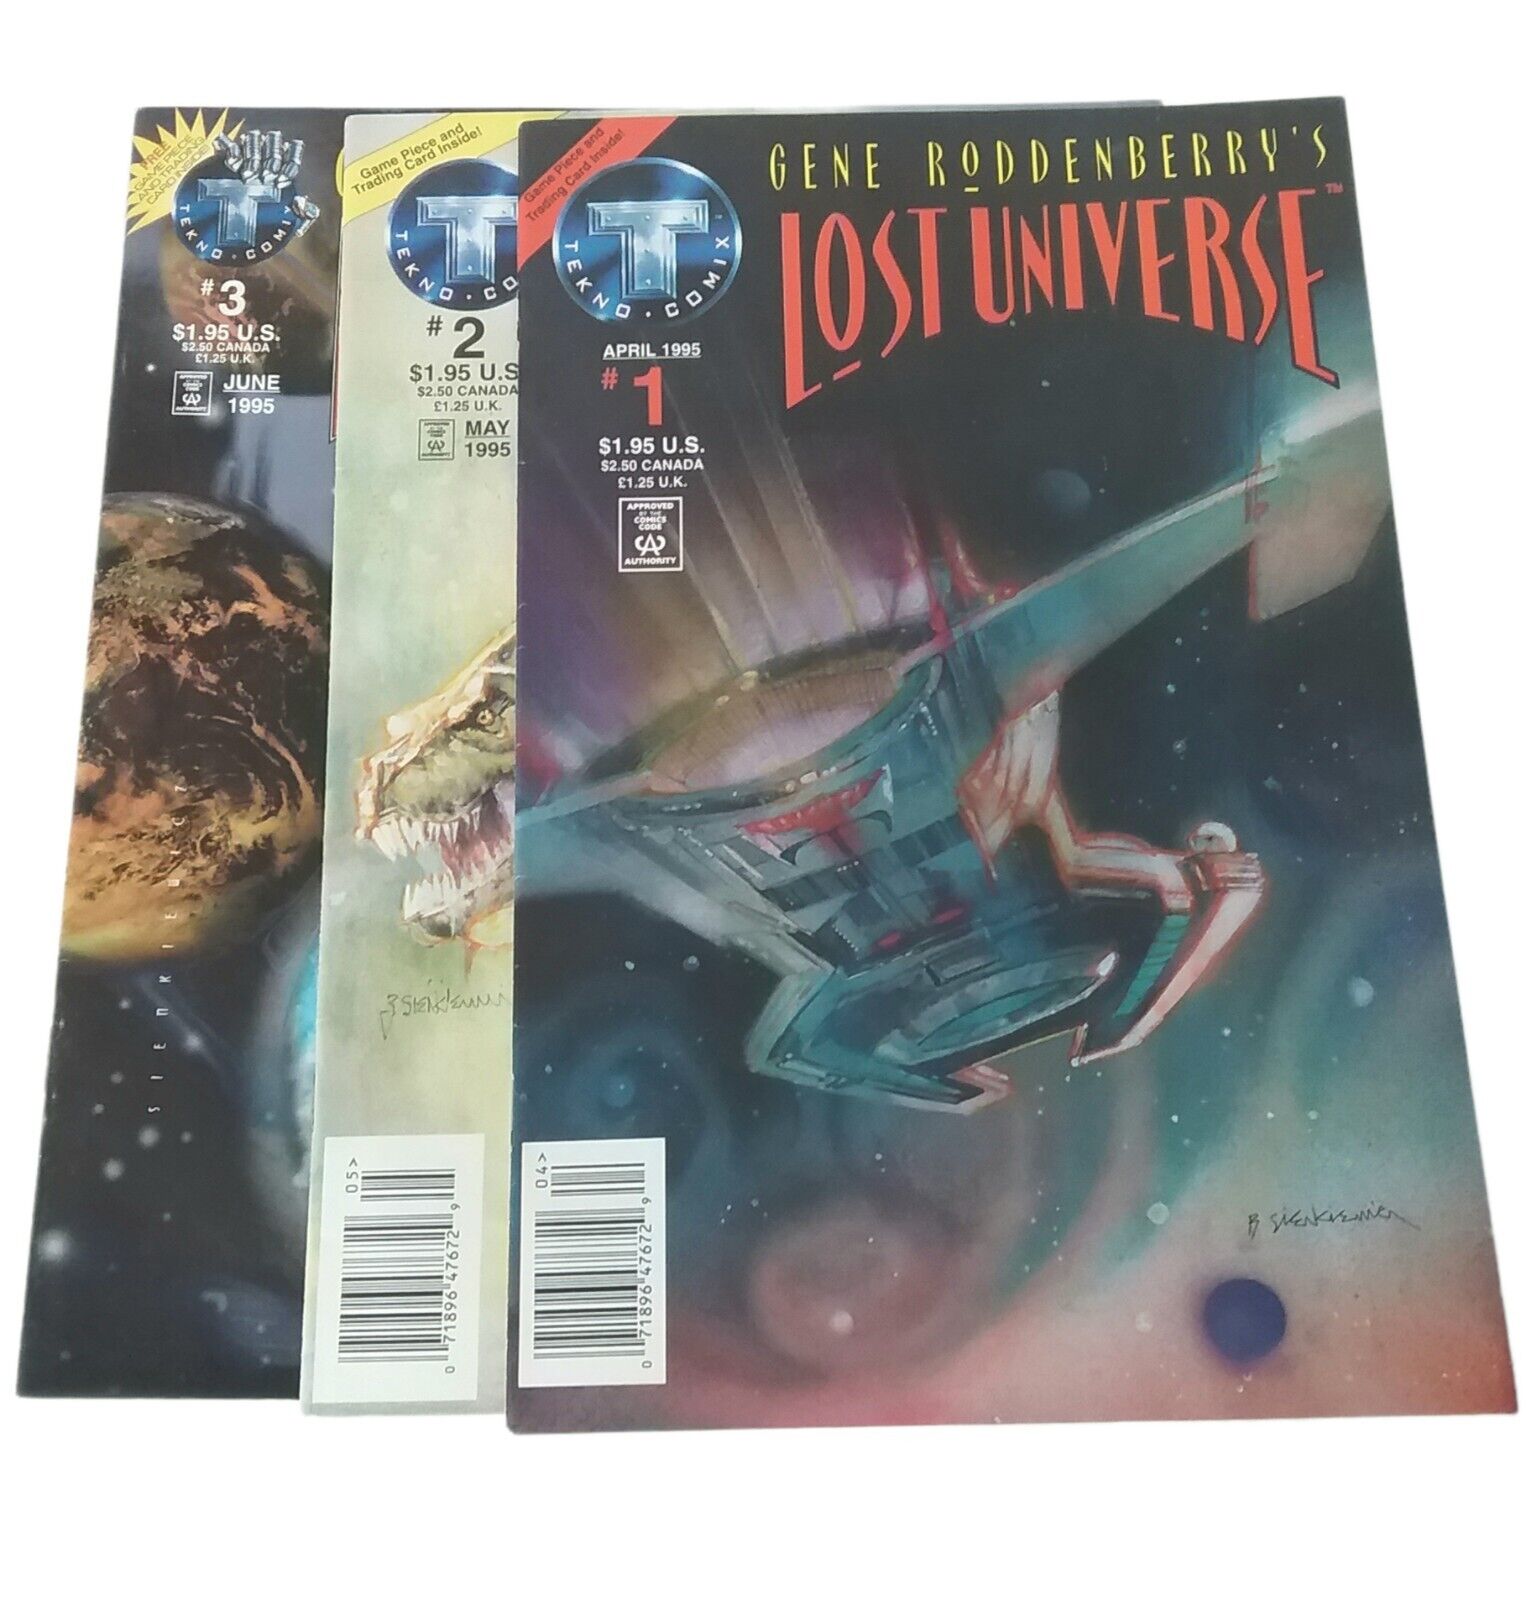 LOST UNIVERSE Issue #1, 2, 3 April May June 1995 Tekno Comix Gene Roddenberry\'s